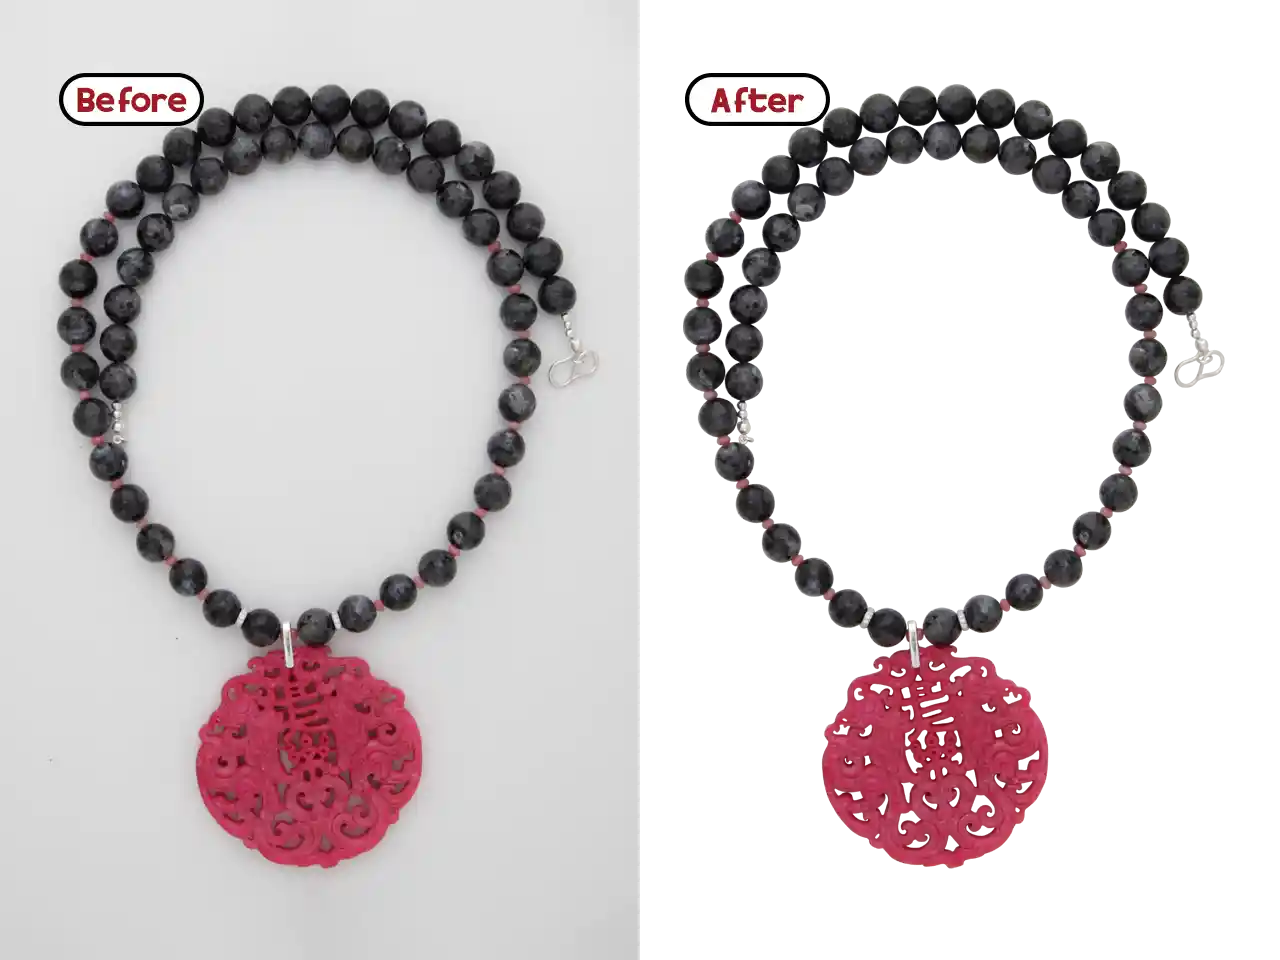 Jewelry Clipping Path, Photo Editing Services graphinery